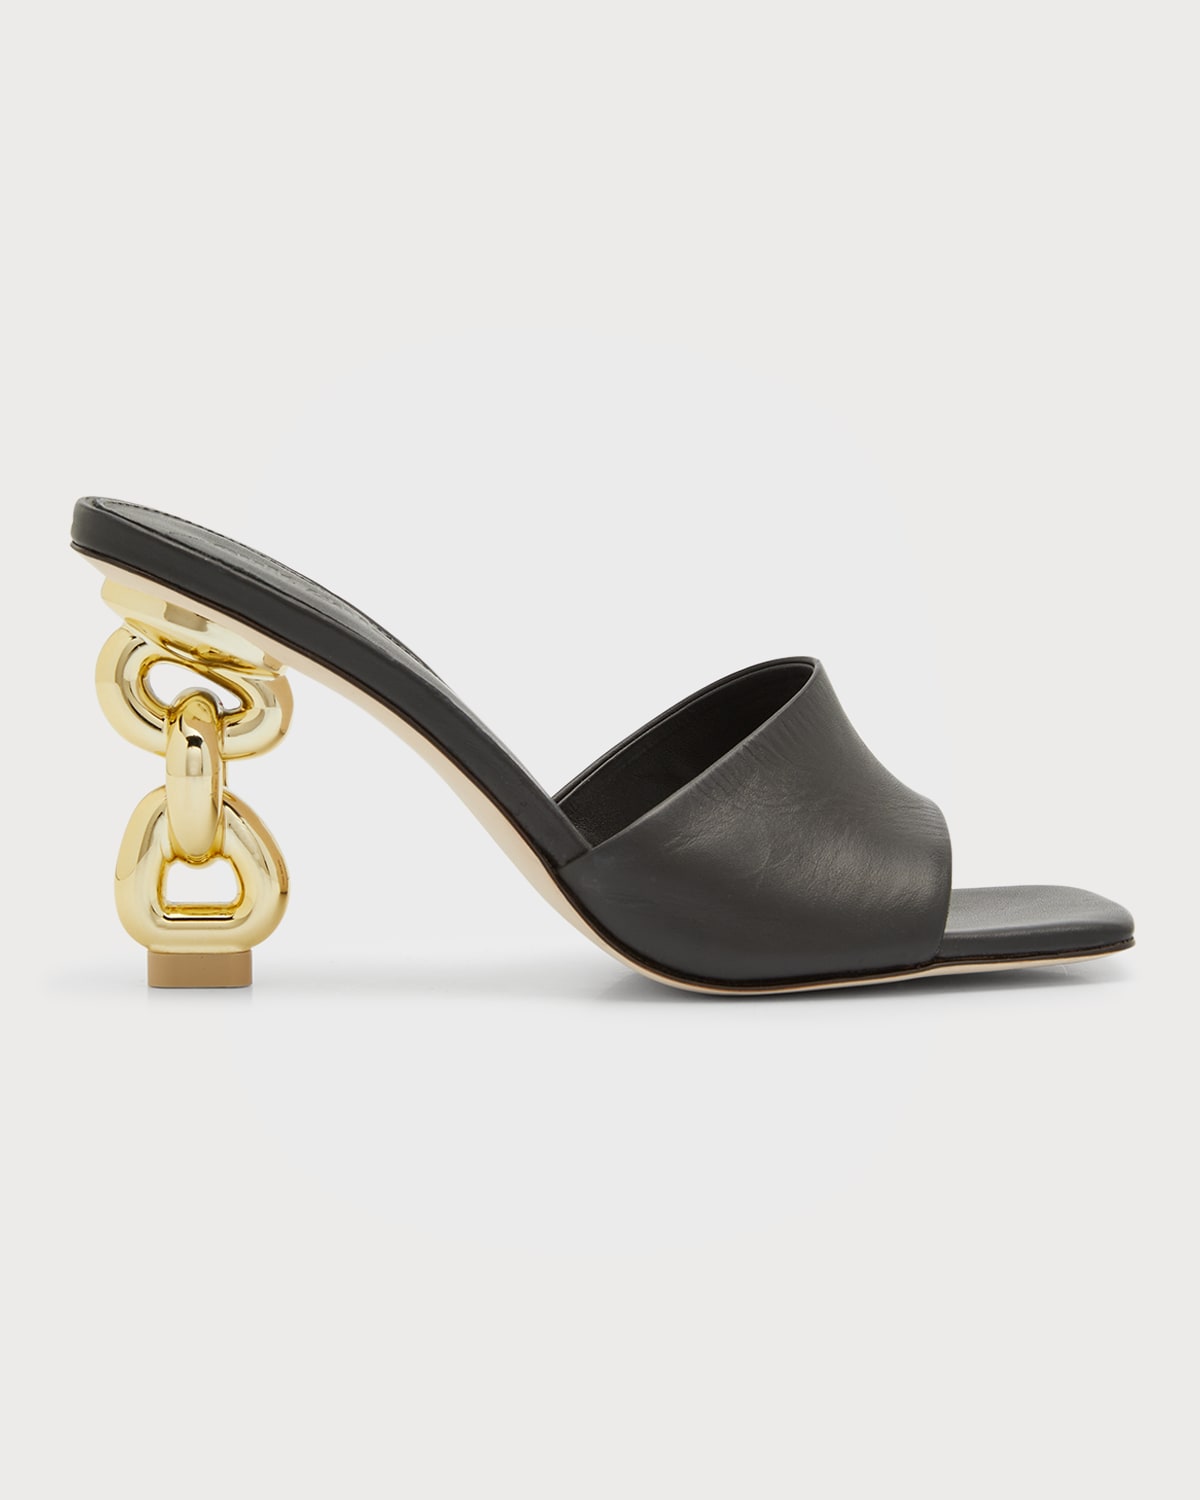 Cult Gaia Nila Chain-Heel Leather Pointed Mules | Neiman Marcus